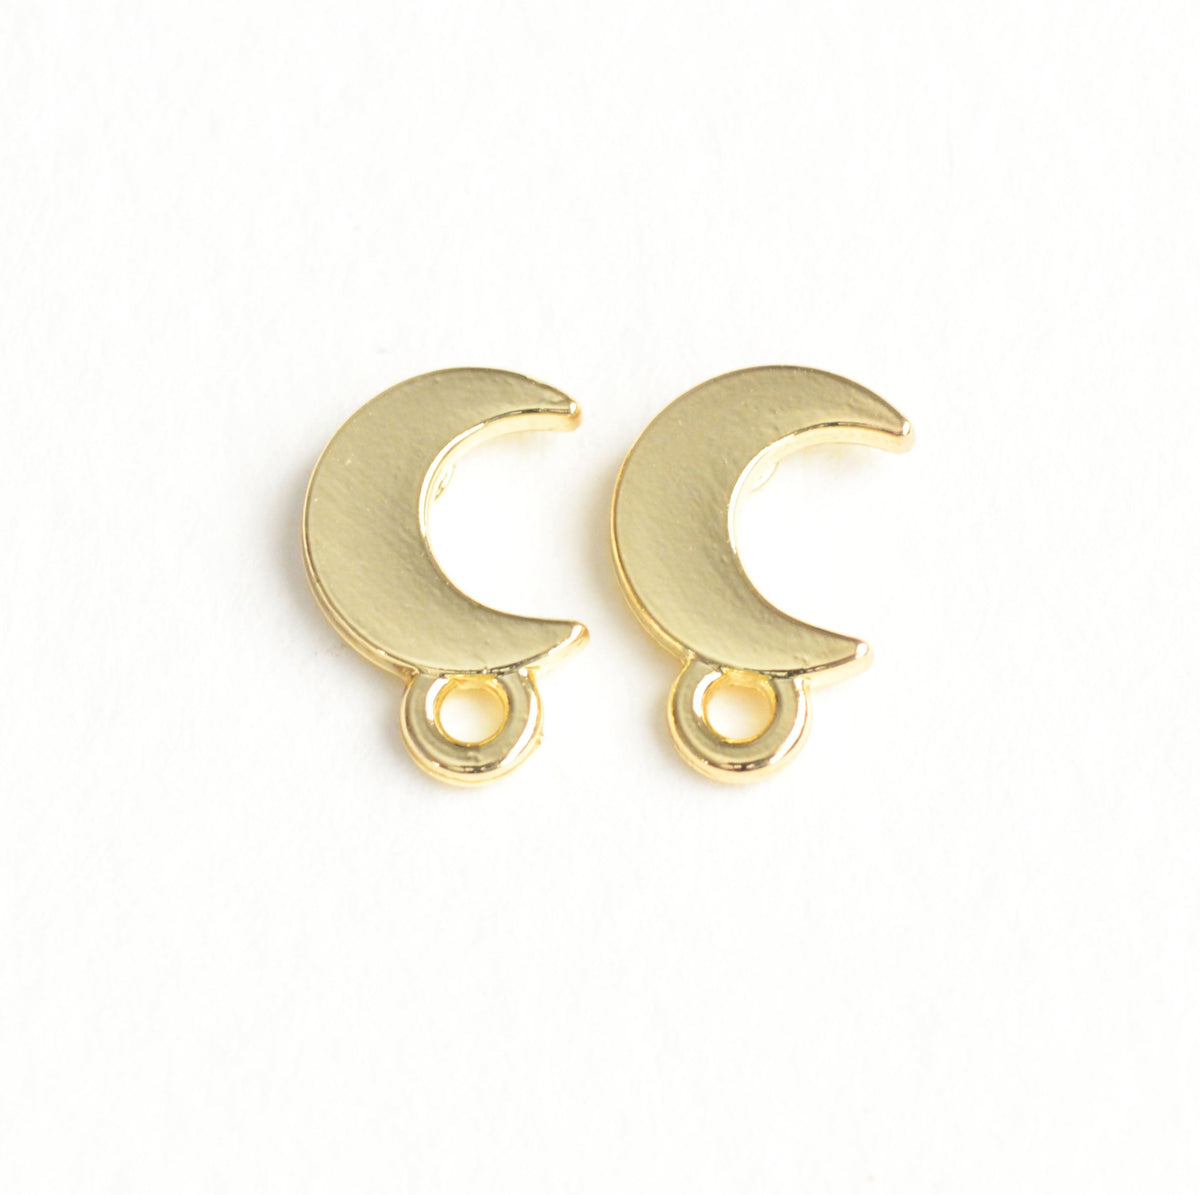 2 Pieces Moon earring findings for jewelry making. Best gift for her. 8045